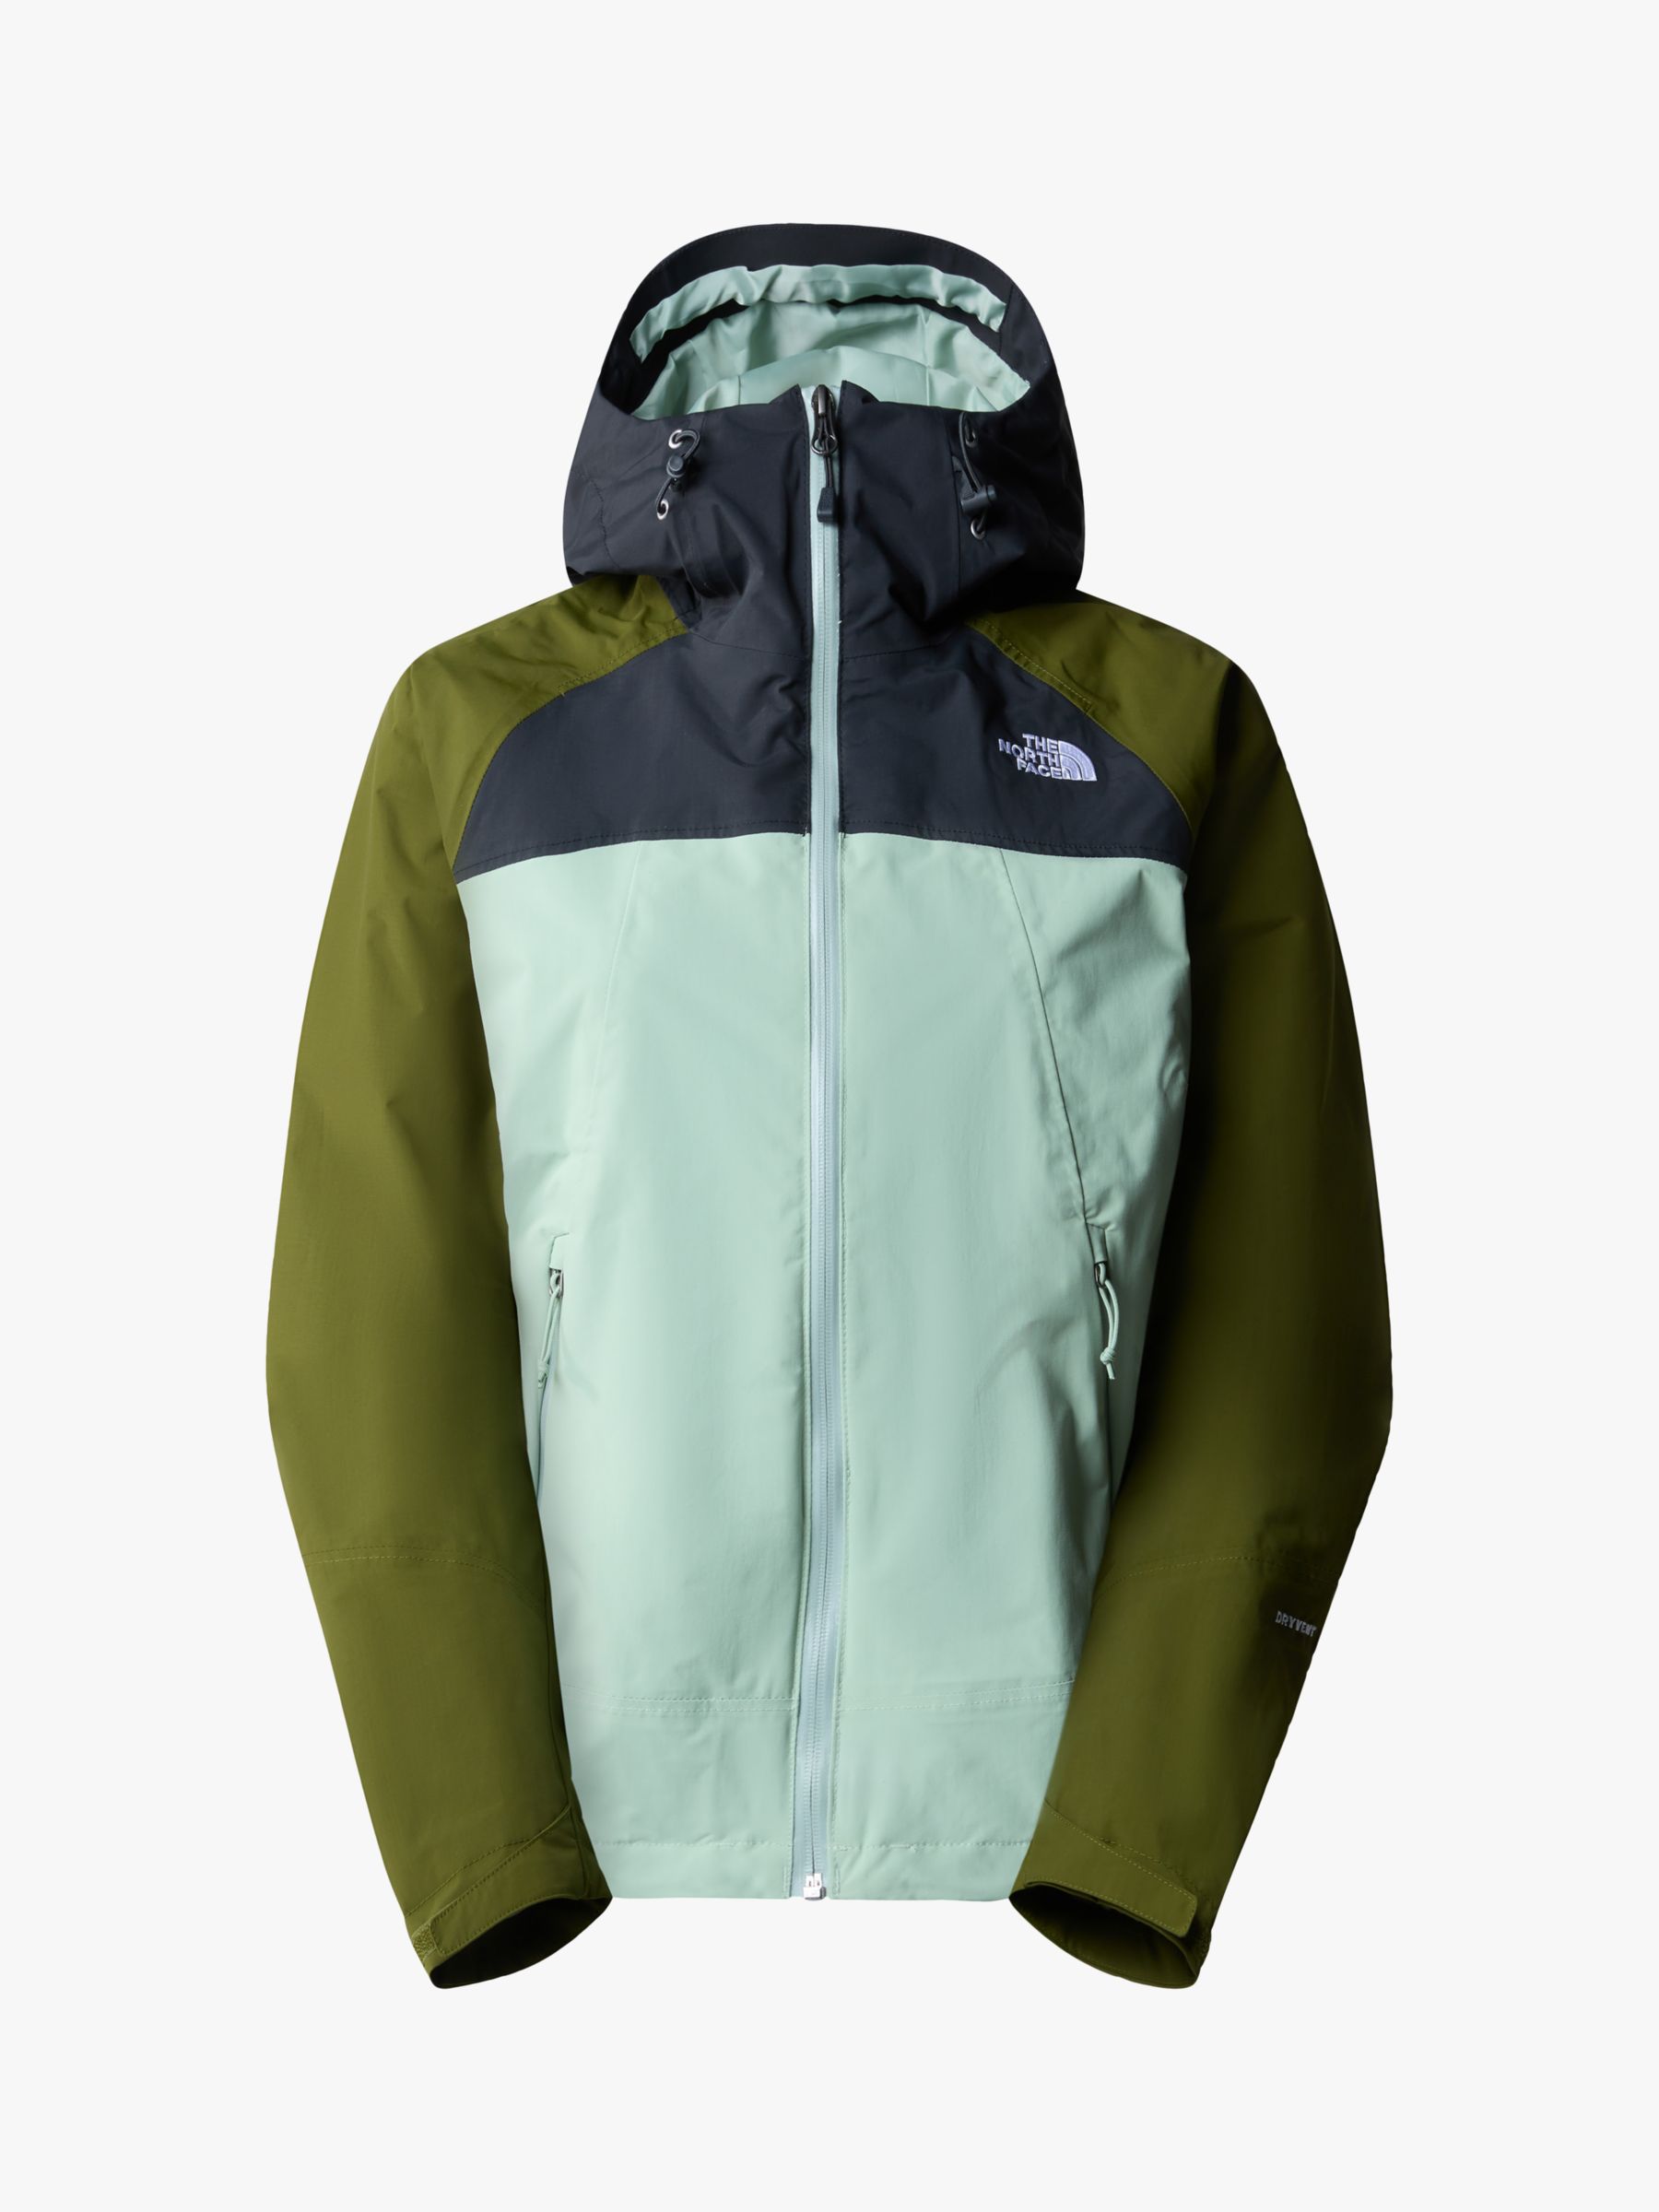 The North Face Women's Stratos Hooded Jacket, Olive/Multi, S